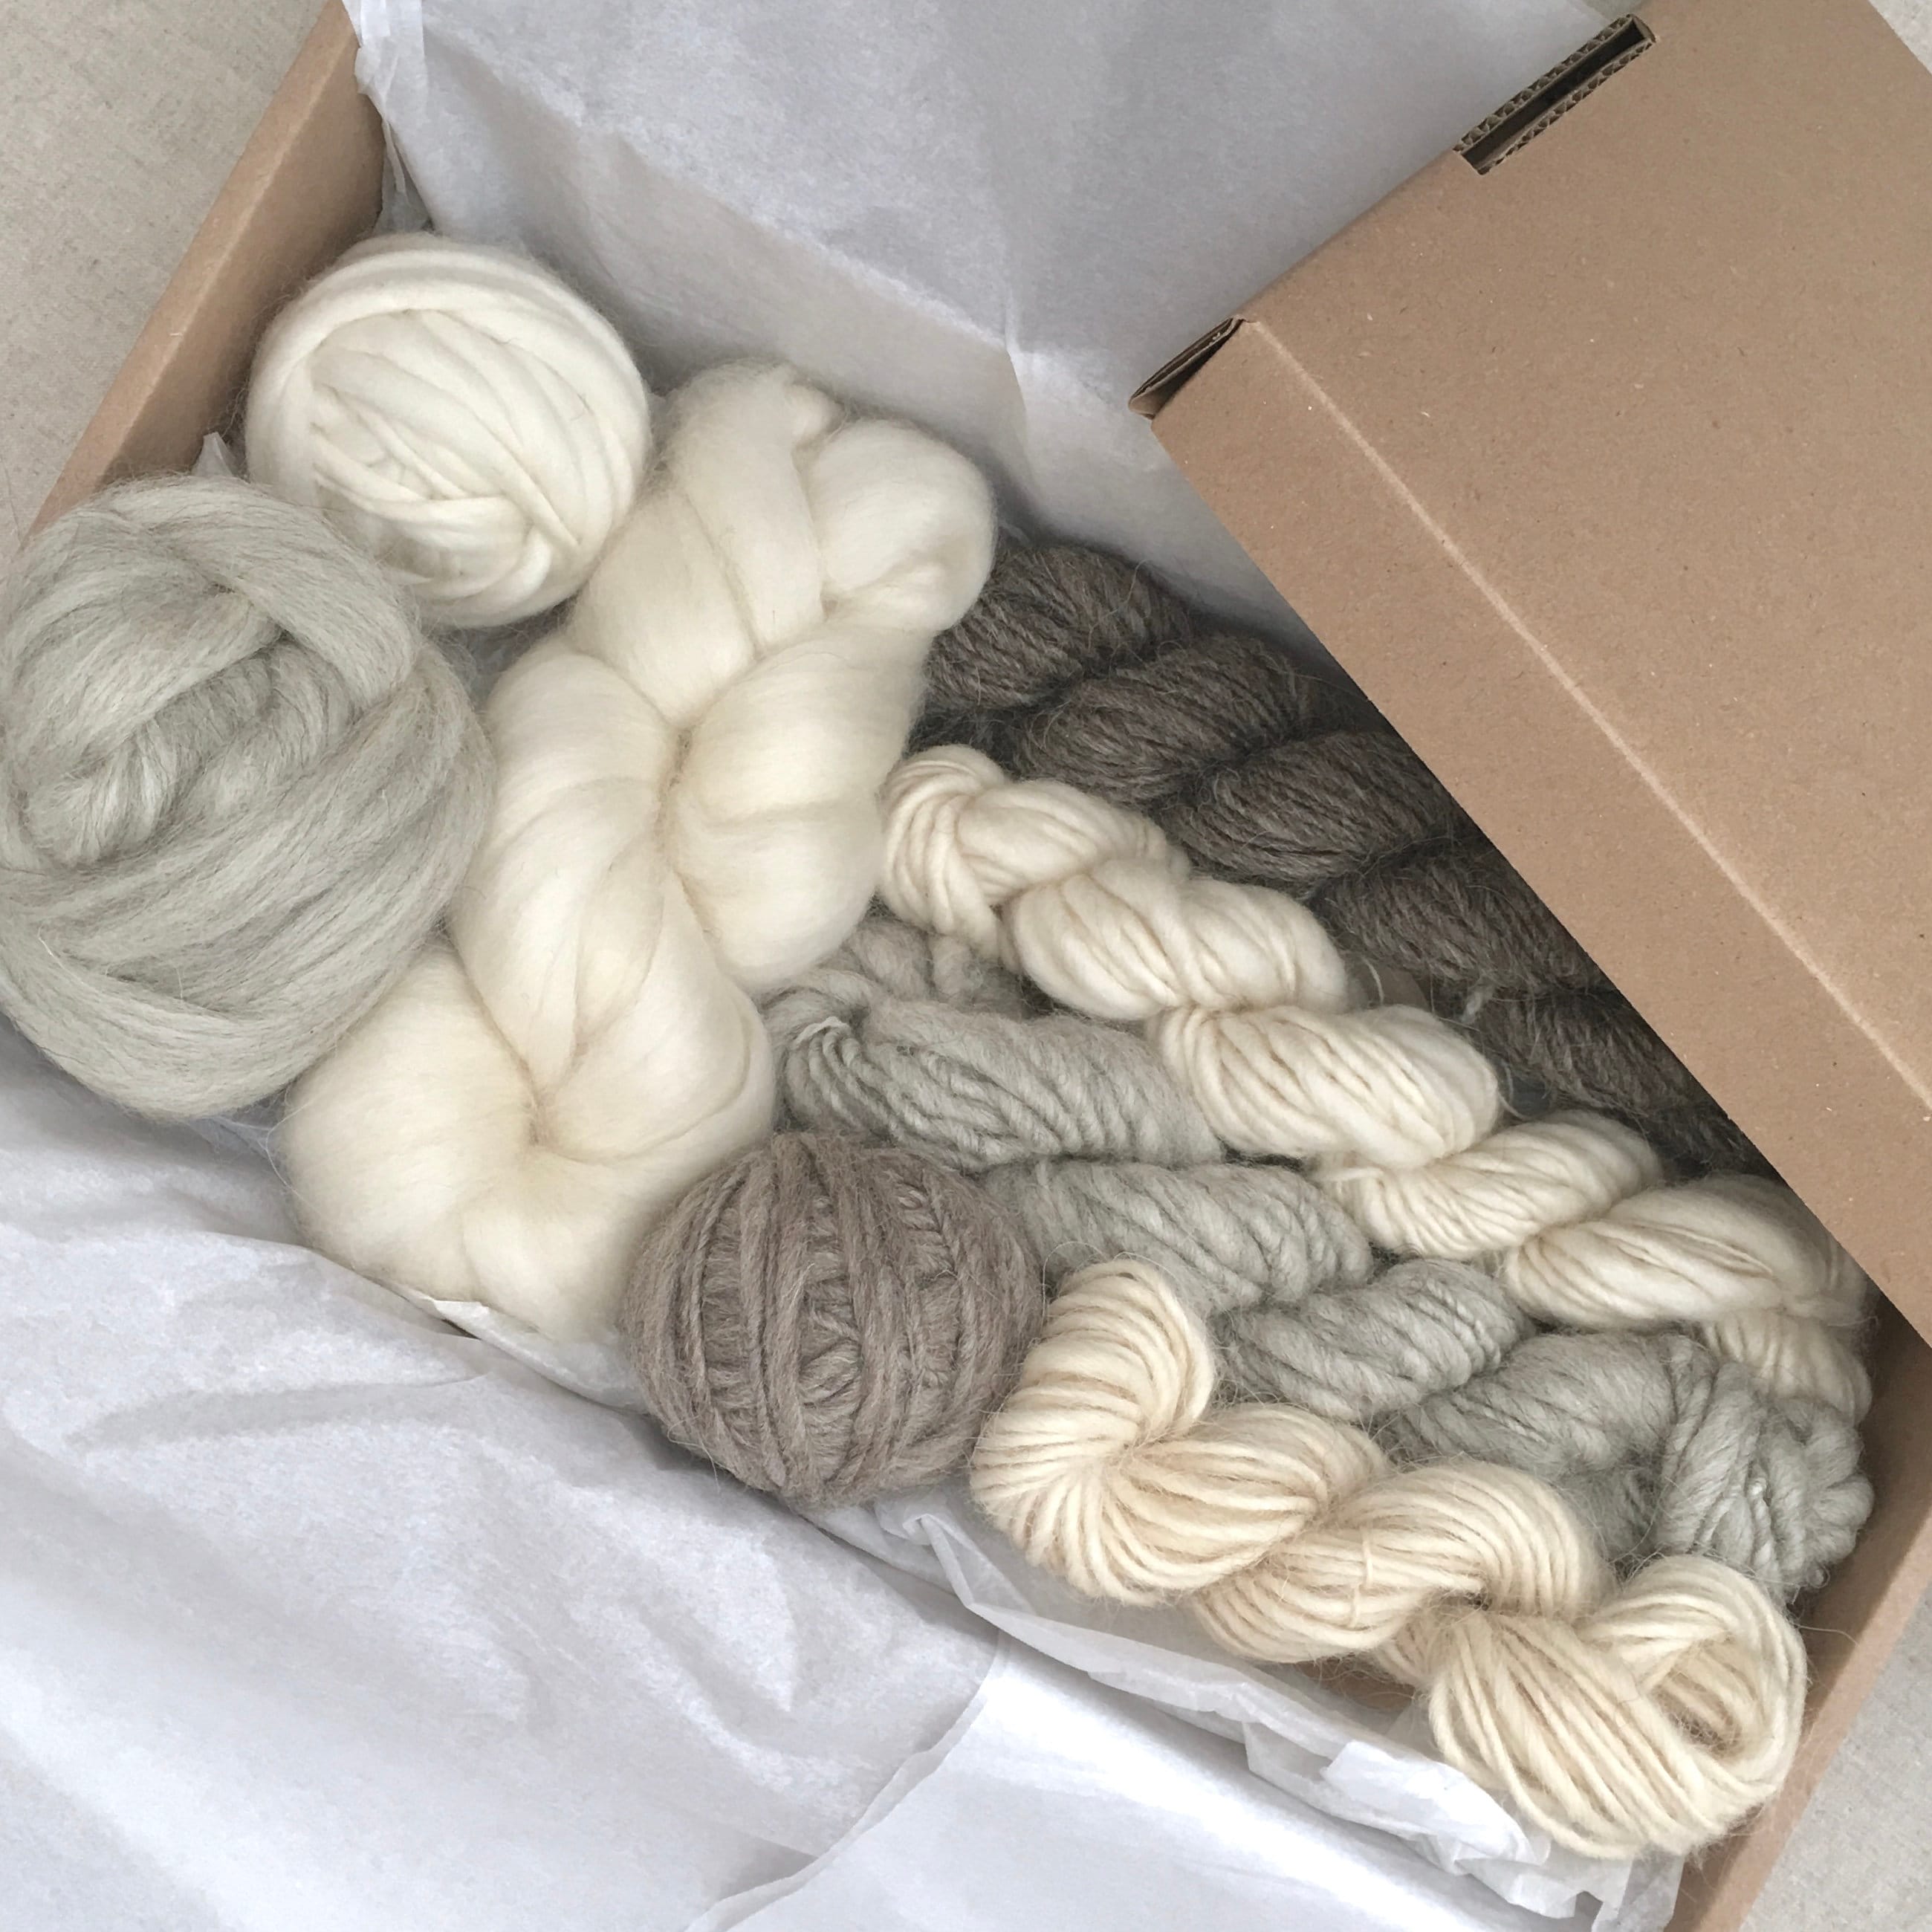 150g Hand Dyed Christmas Yarn Box, Variegated Speckled Yarn, 4 Ply Skeins,  Skein Set 